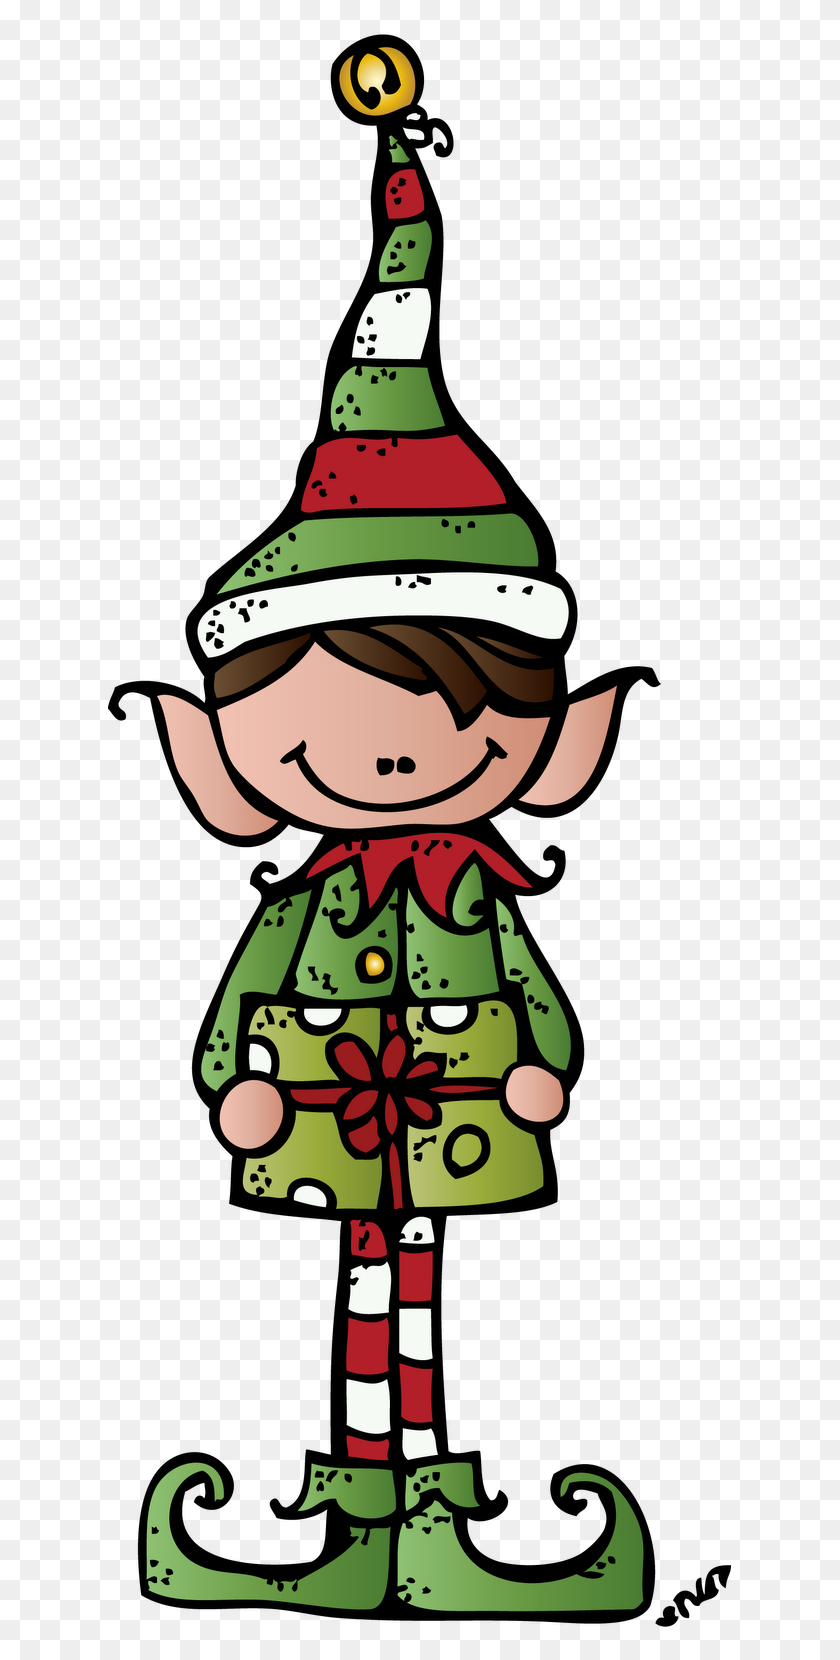 623x1600 Busy Bees Elf On The Shelf Unit Postedcan't Wait - Elf On The Shelf PNG